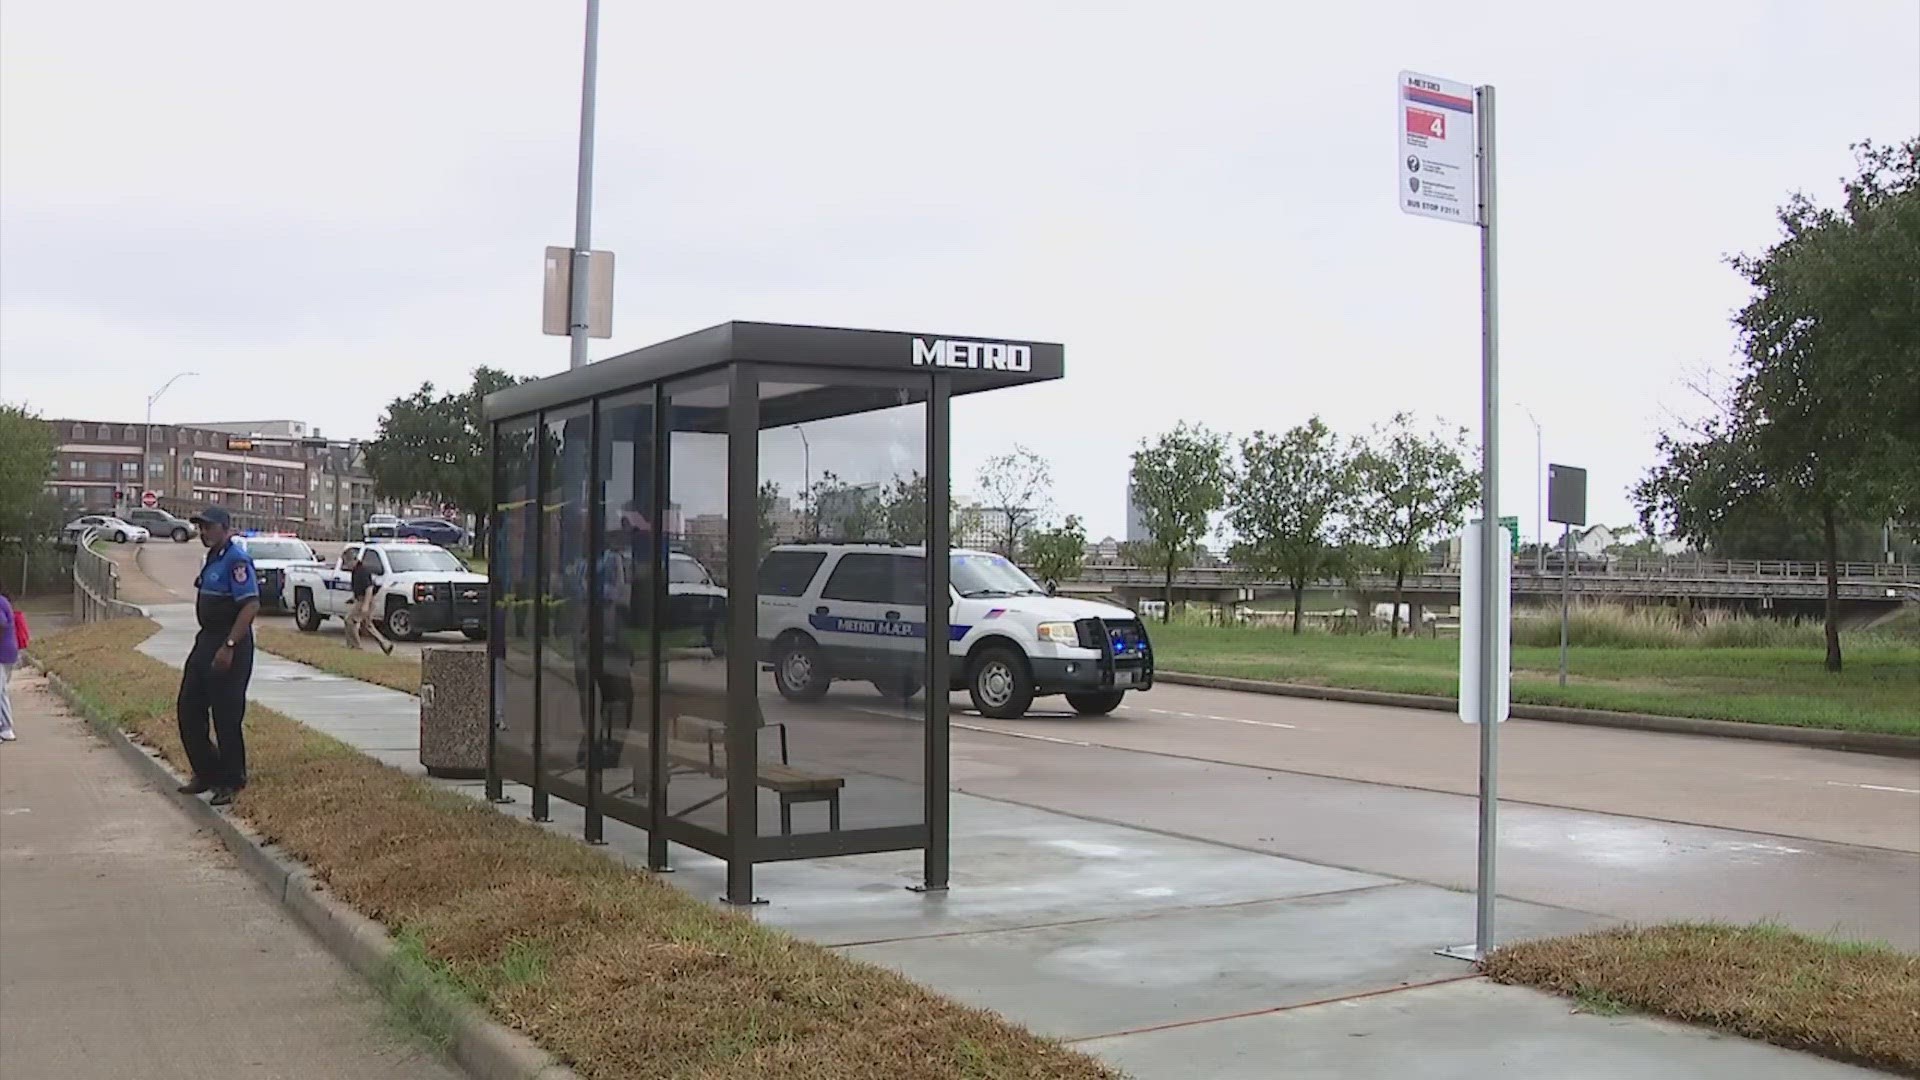 State Rep. Jolanda Jones worked with METRO after hearing from the community about the condition of the stop.